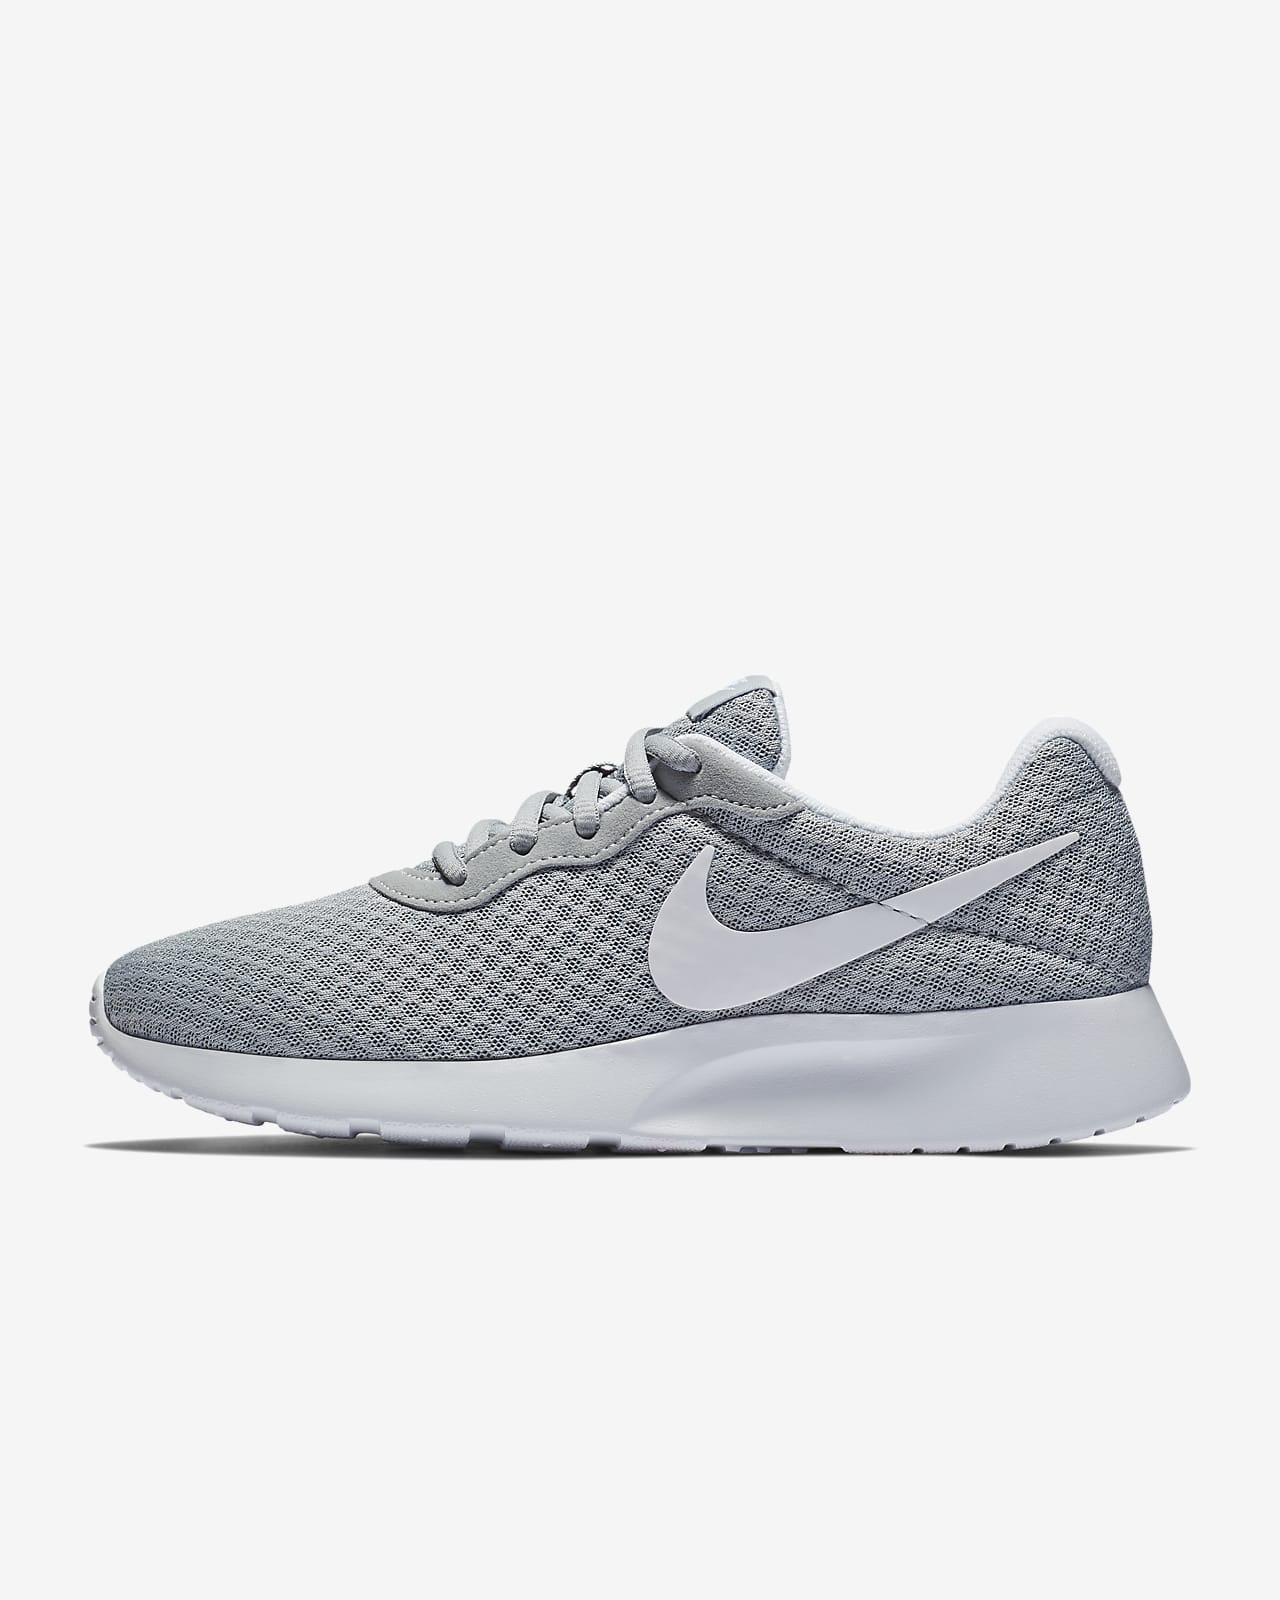 nike grises zapatillas mujer